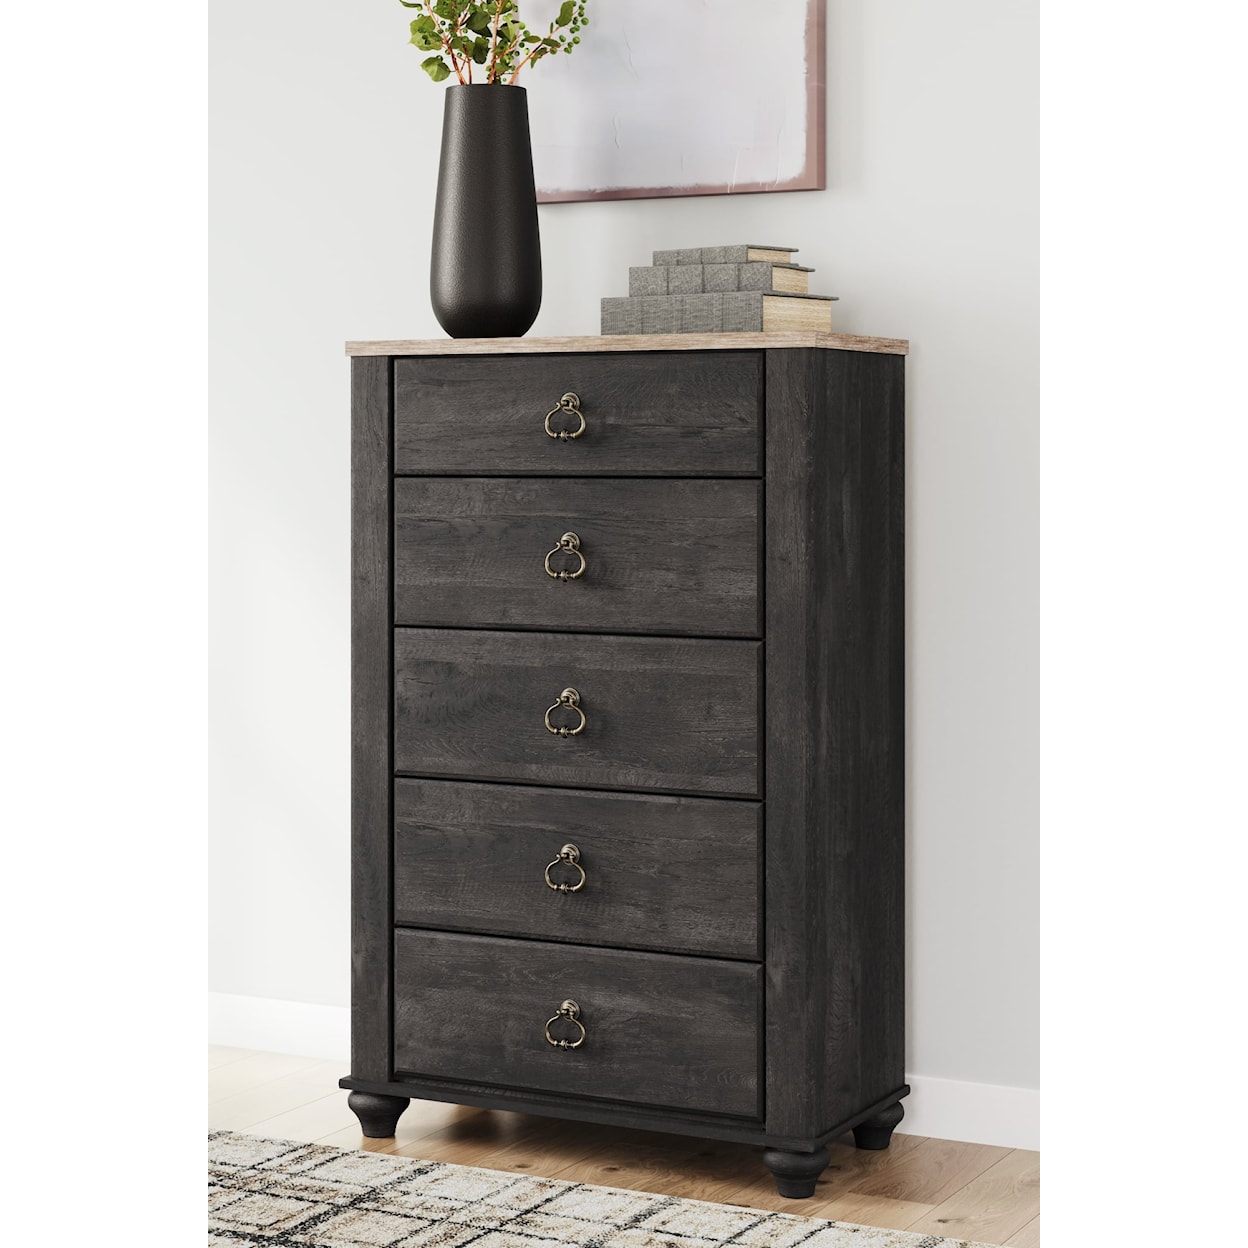 Signature Design by Ashley Nanforth Bedroom Chest